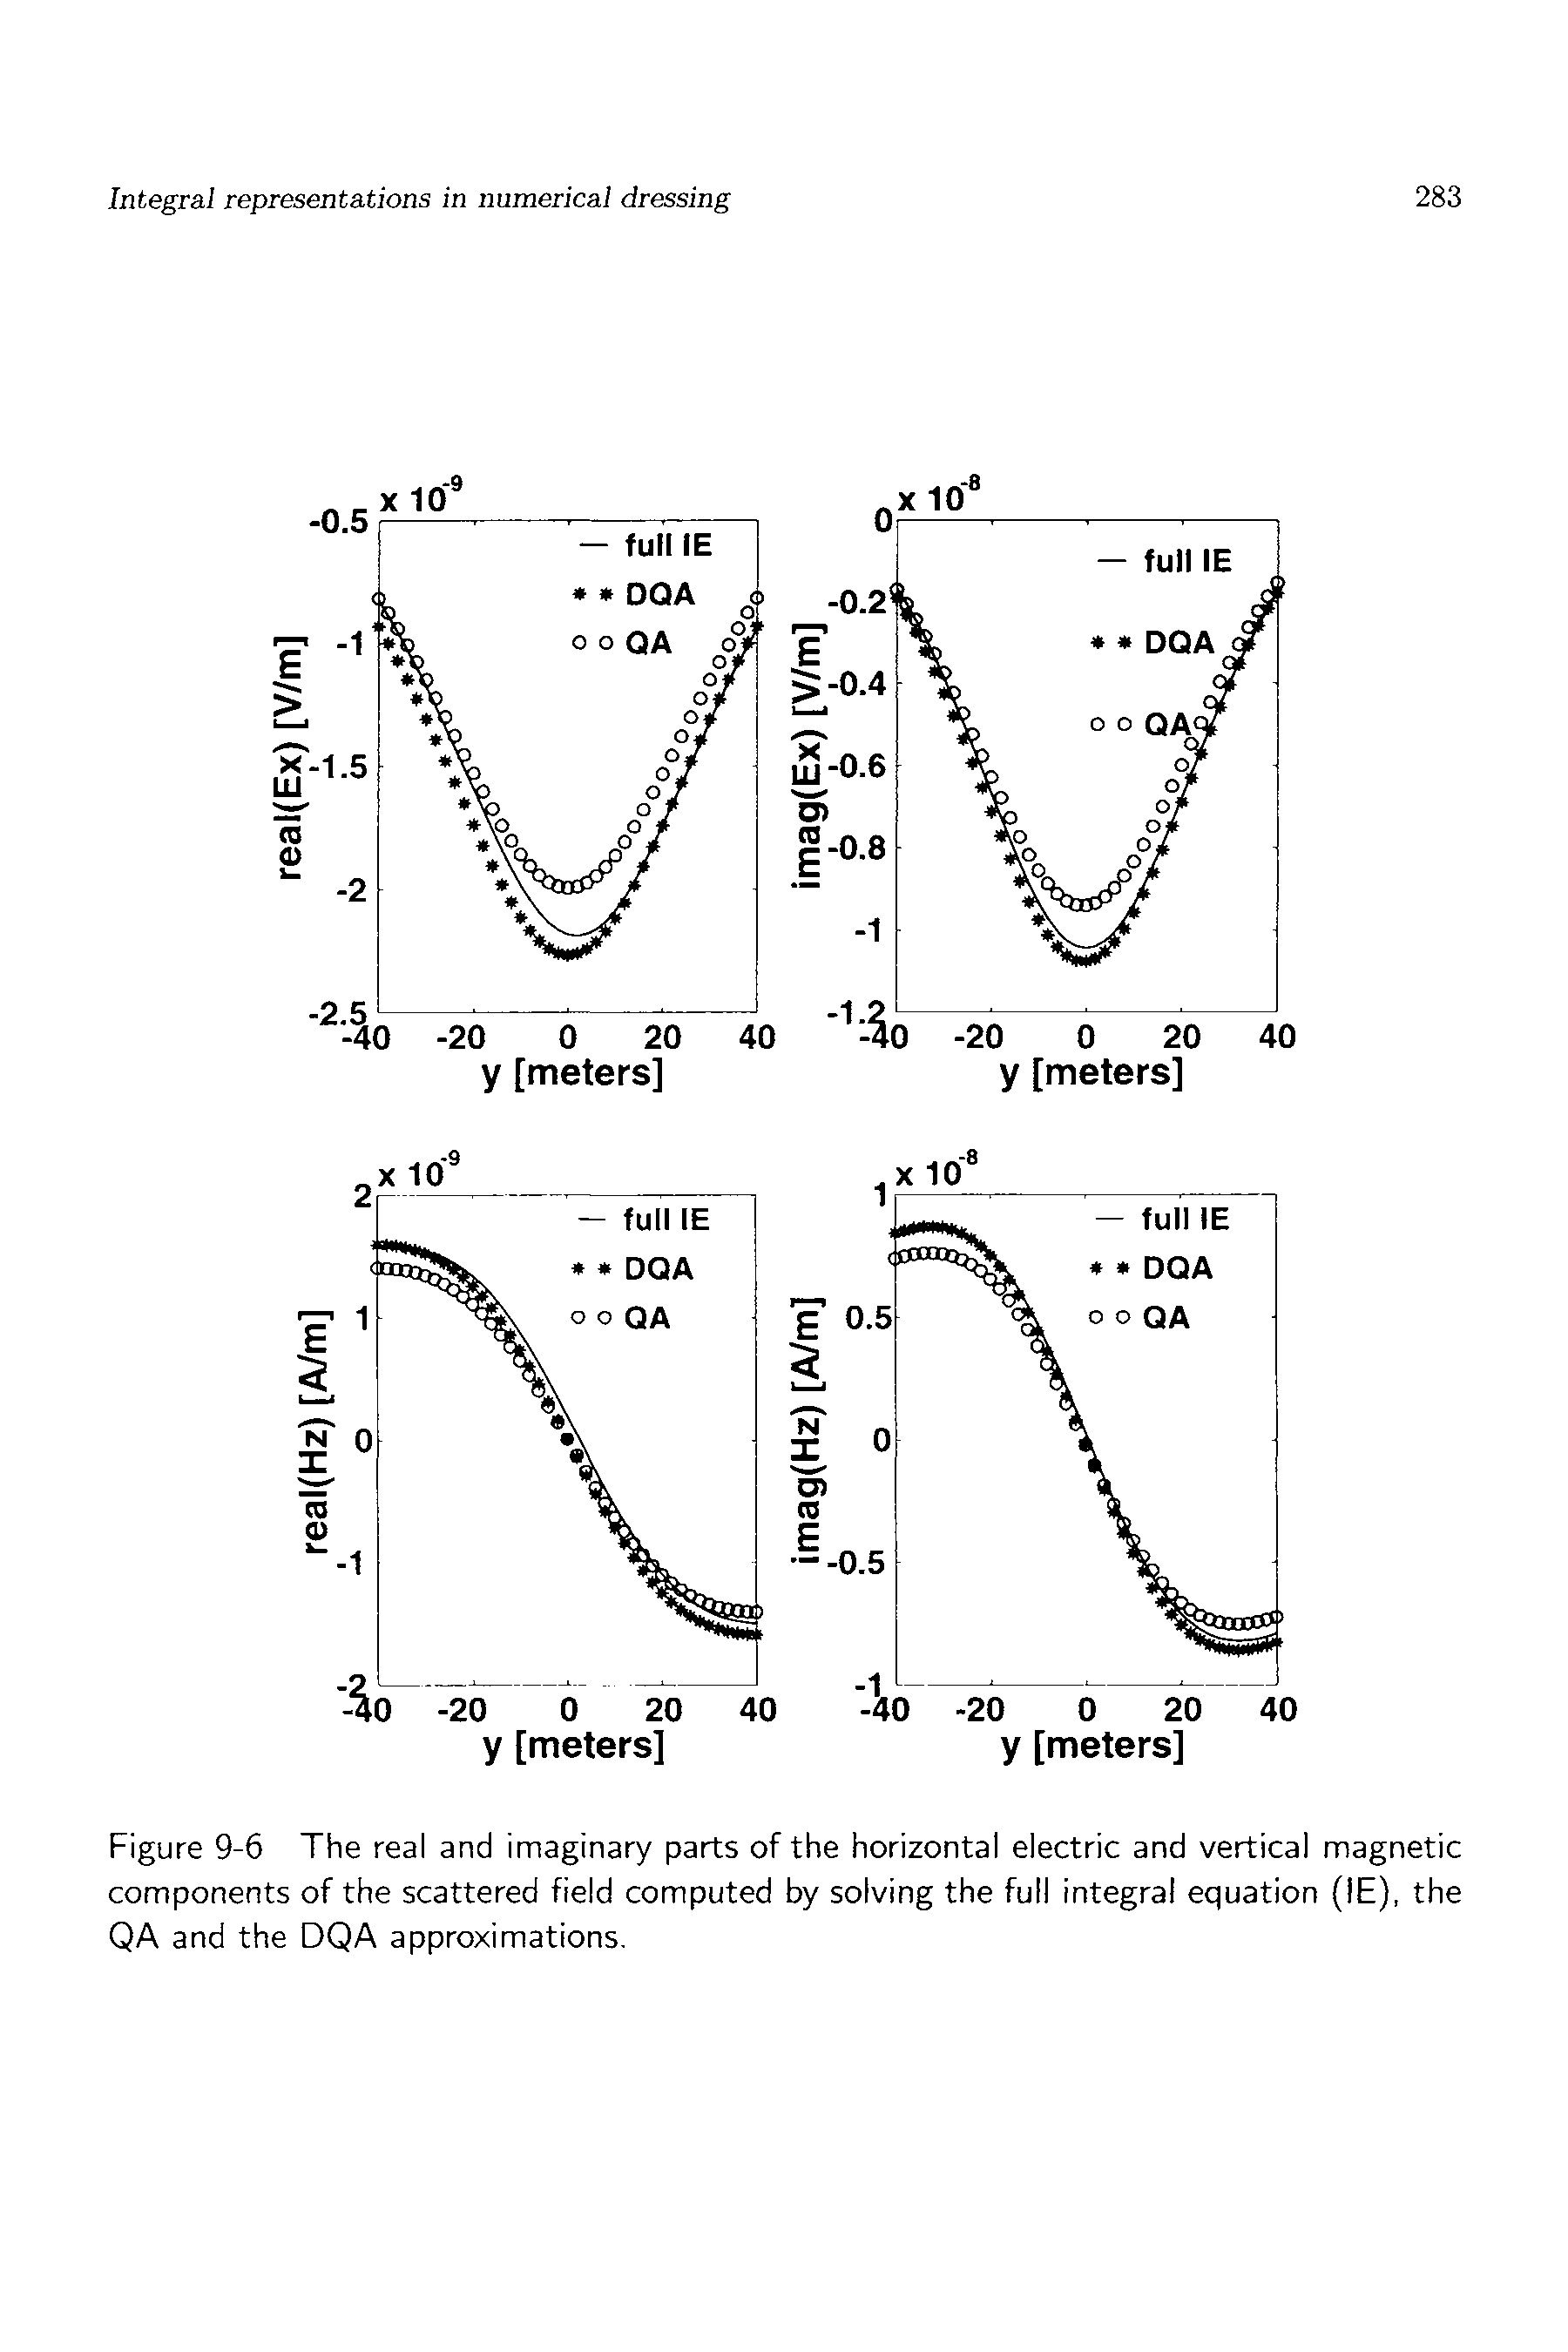 Figure 9-6 The real and imaginary parts of the horizontal electric and vertical magnetic components of the scattered field computed by solving the full integral equation (IE), the QA and the DQA approximations.